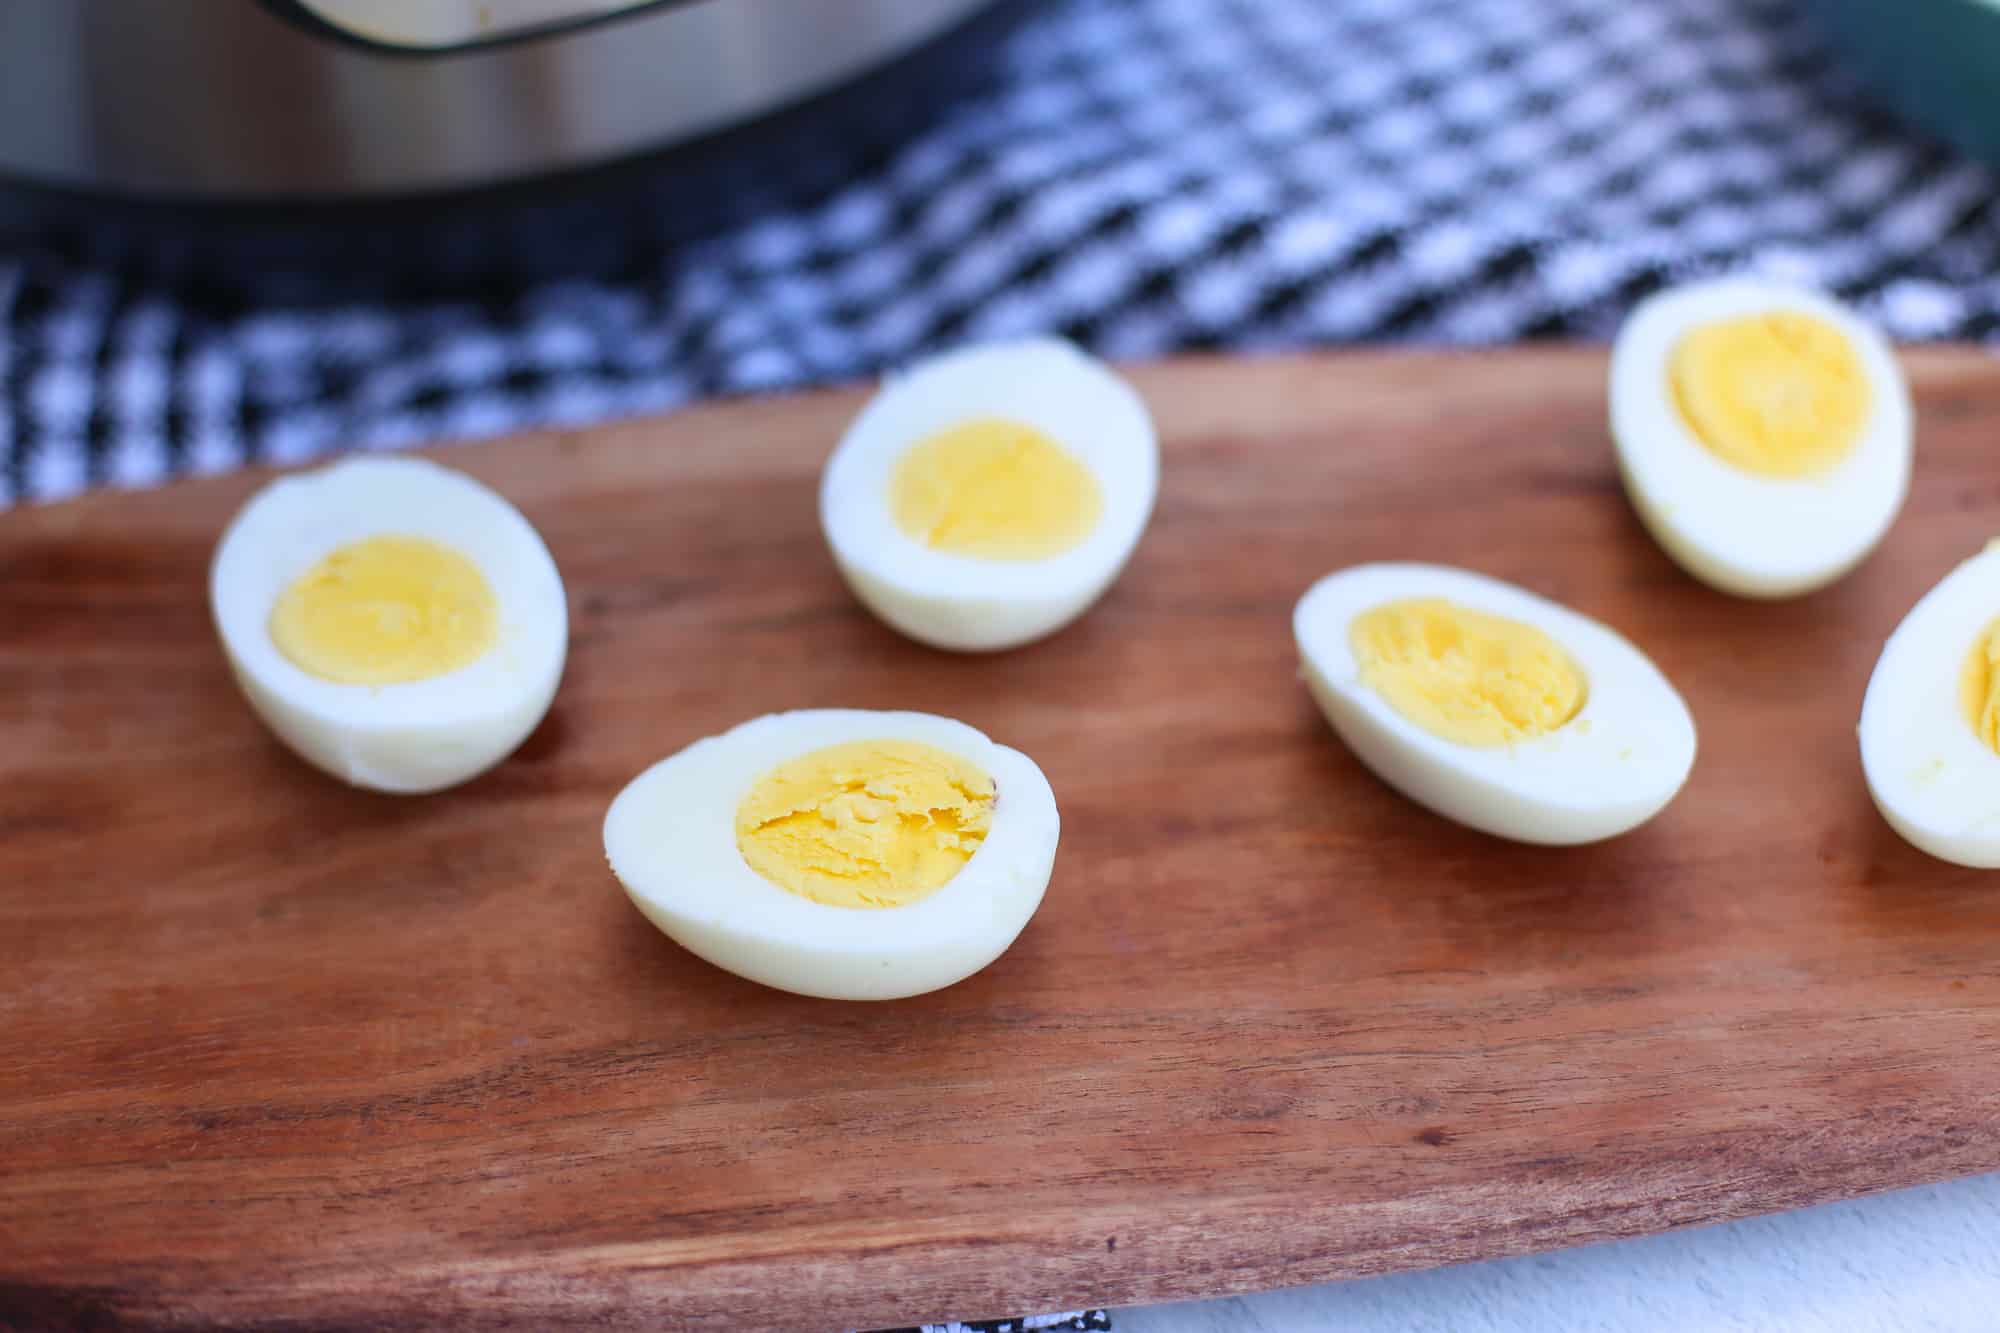 Hard-boiled eggs sliced in half and lined up on a wooden serving tray.